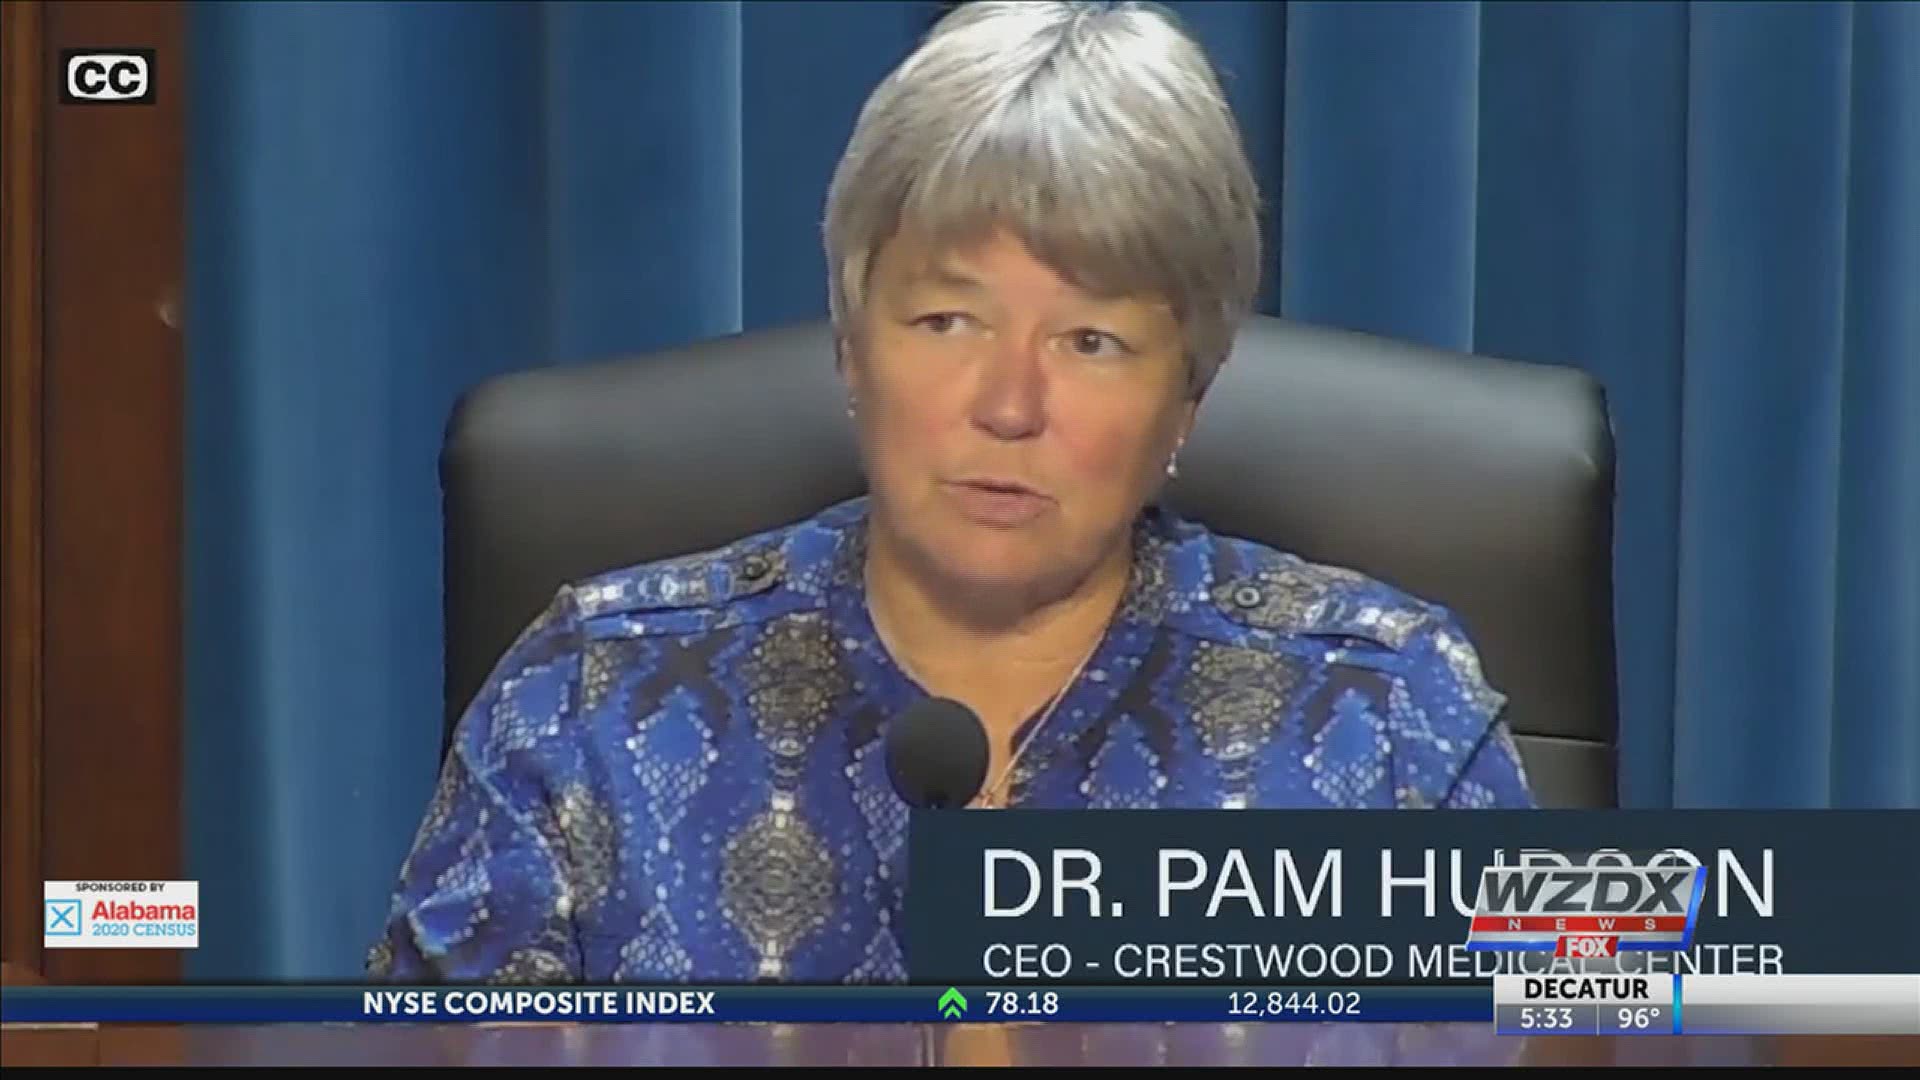 The chances of being placed in the intensive care unit and eventually being put on a ventilator have now been reduced by half, according to Crestwood Hospital CEO.